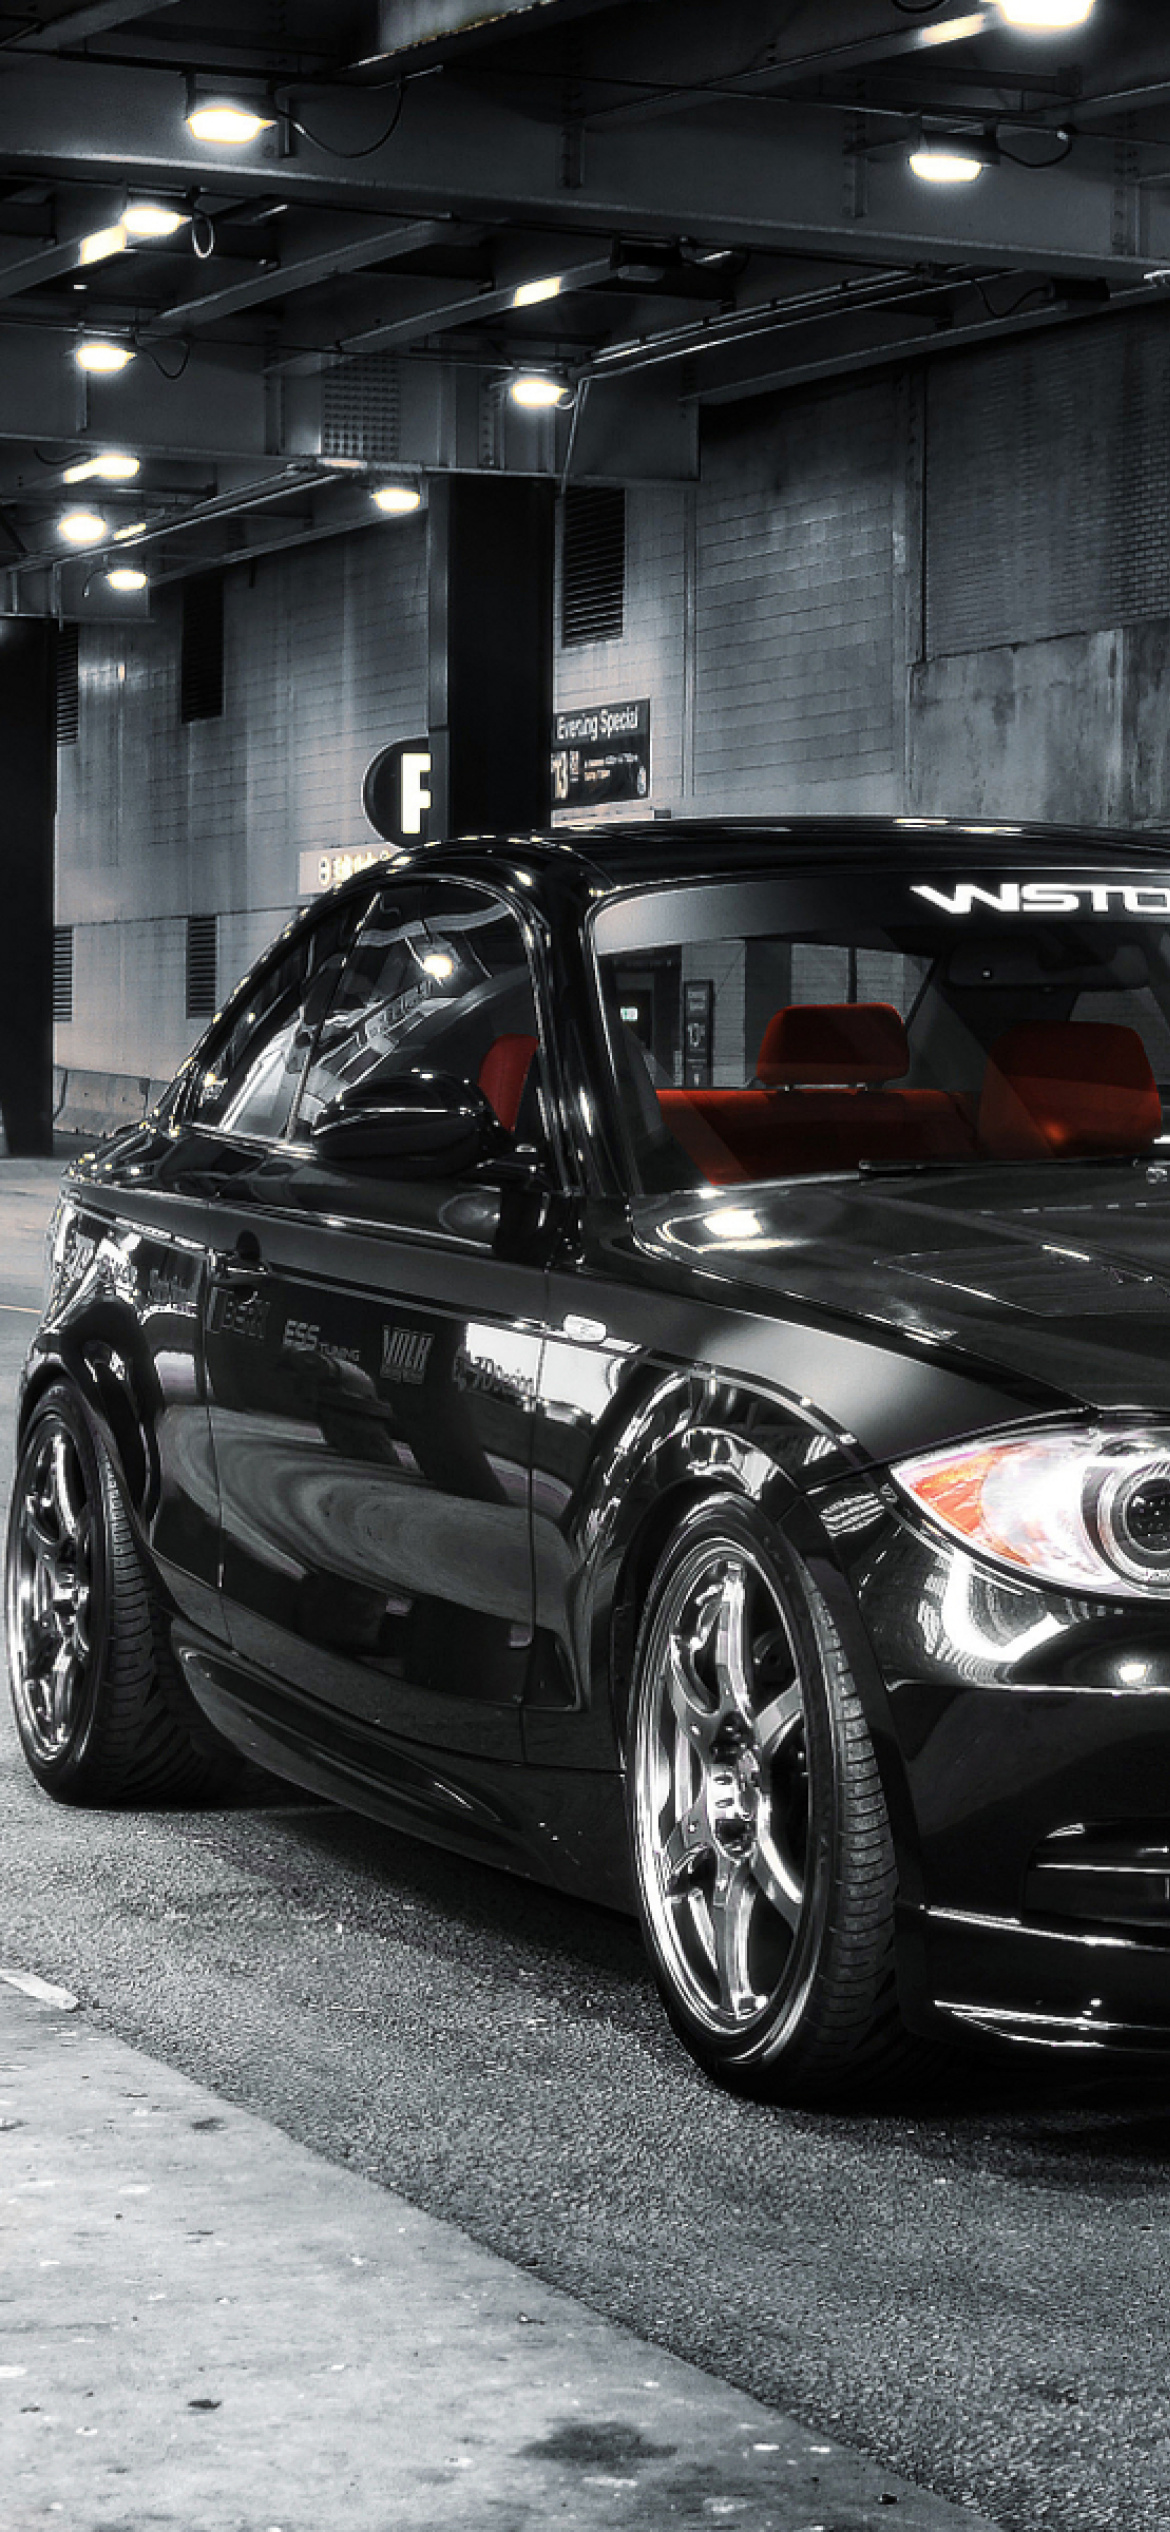 Bmw 135I Wallpapers